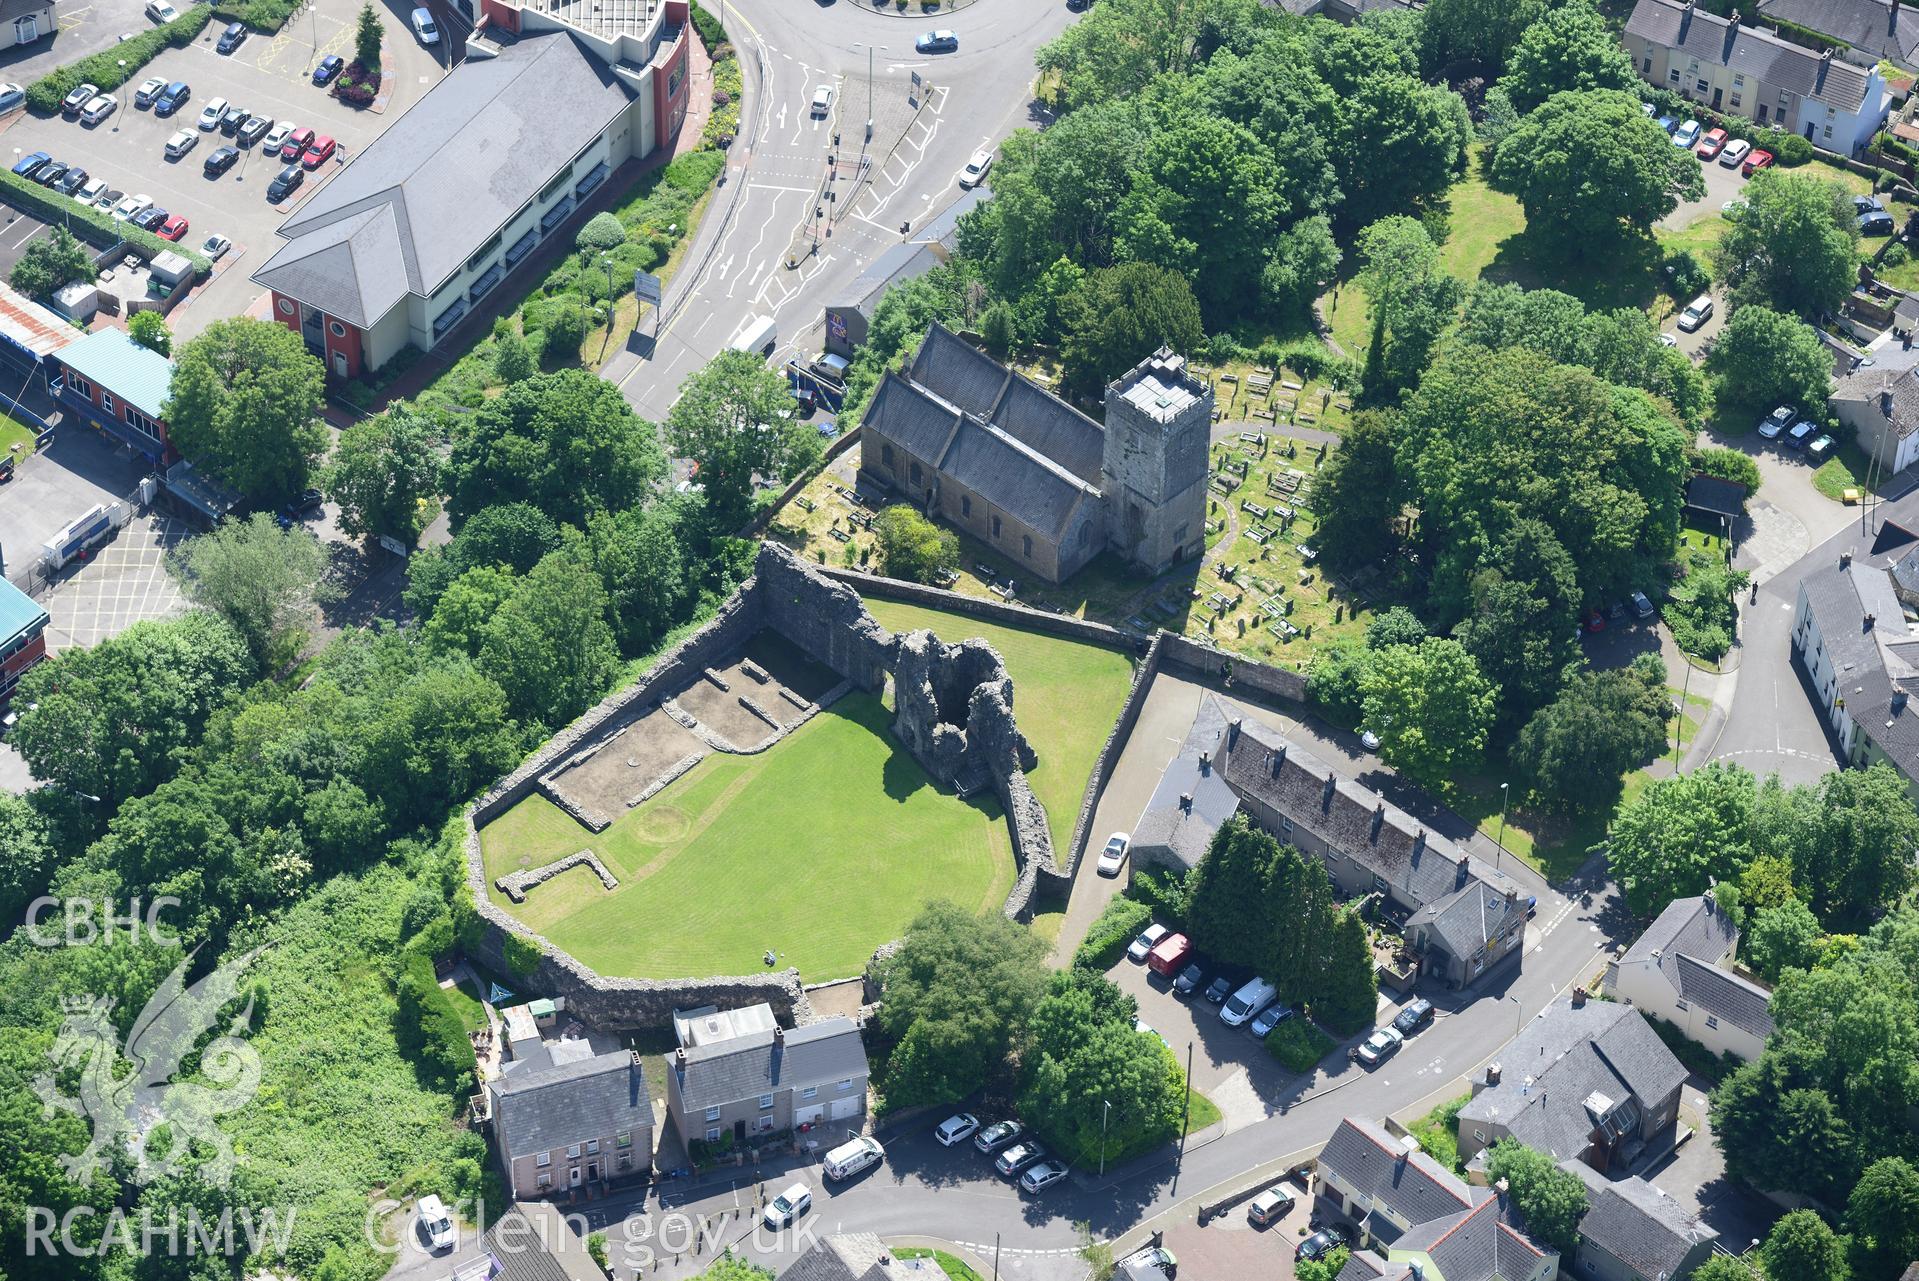 Wide view of the town of Bridgend including St. Illtyd's Church and Newcastle castle. Oblique aerial photograph taken during the Royal Commission's programme of archaeological aerial reconnaissance by Toby Driver on 19th June 2015.